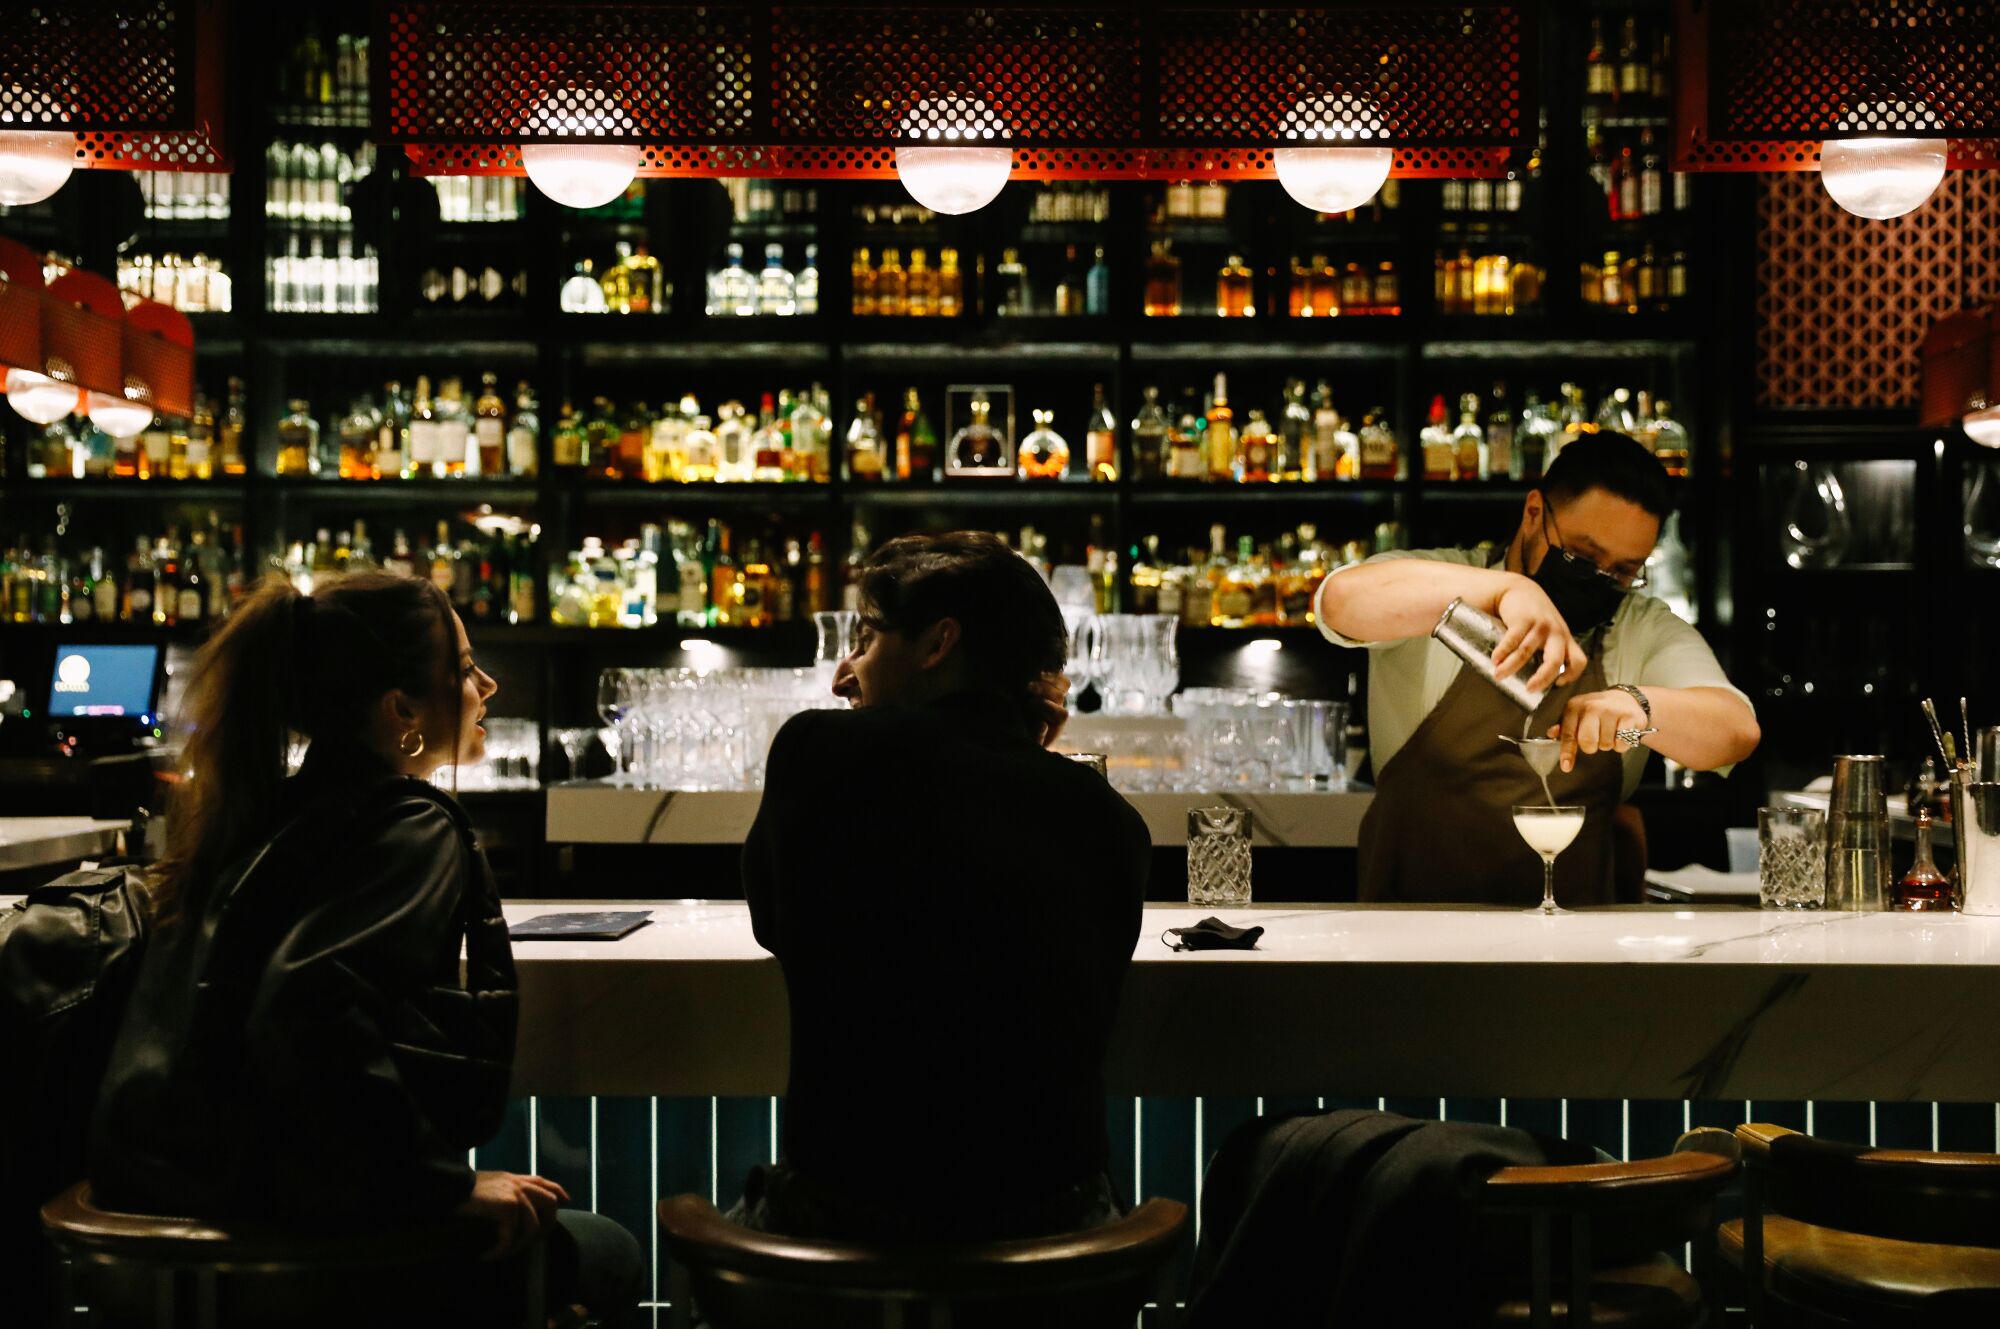 A bartender pours a drink.